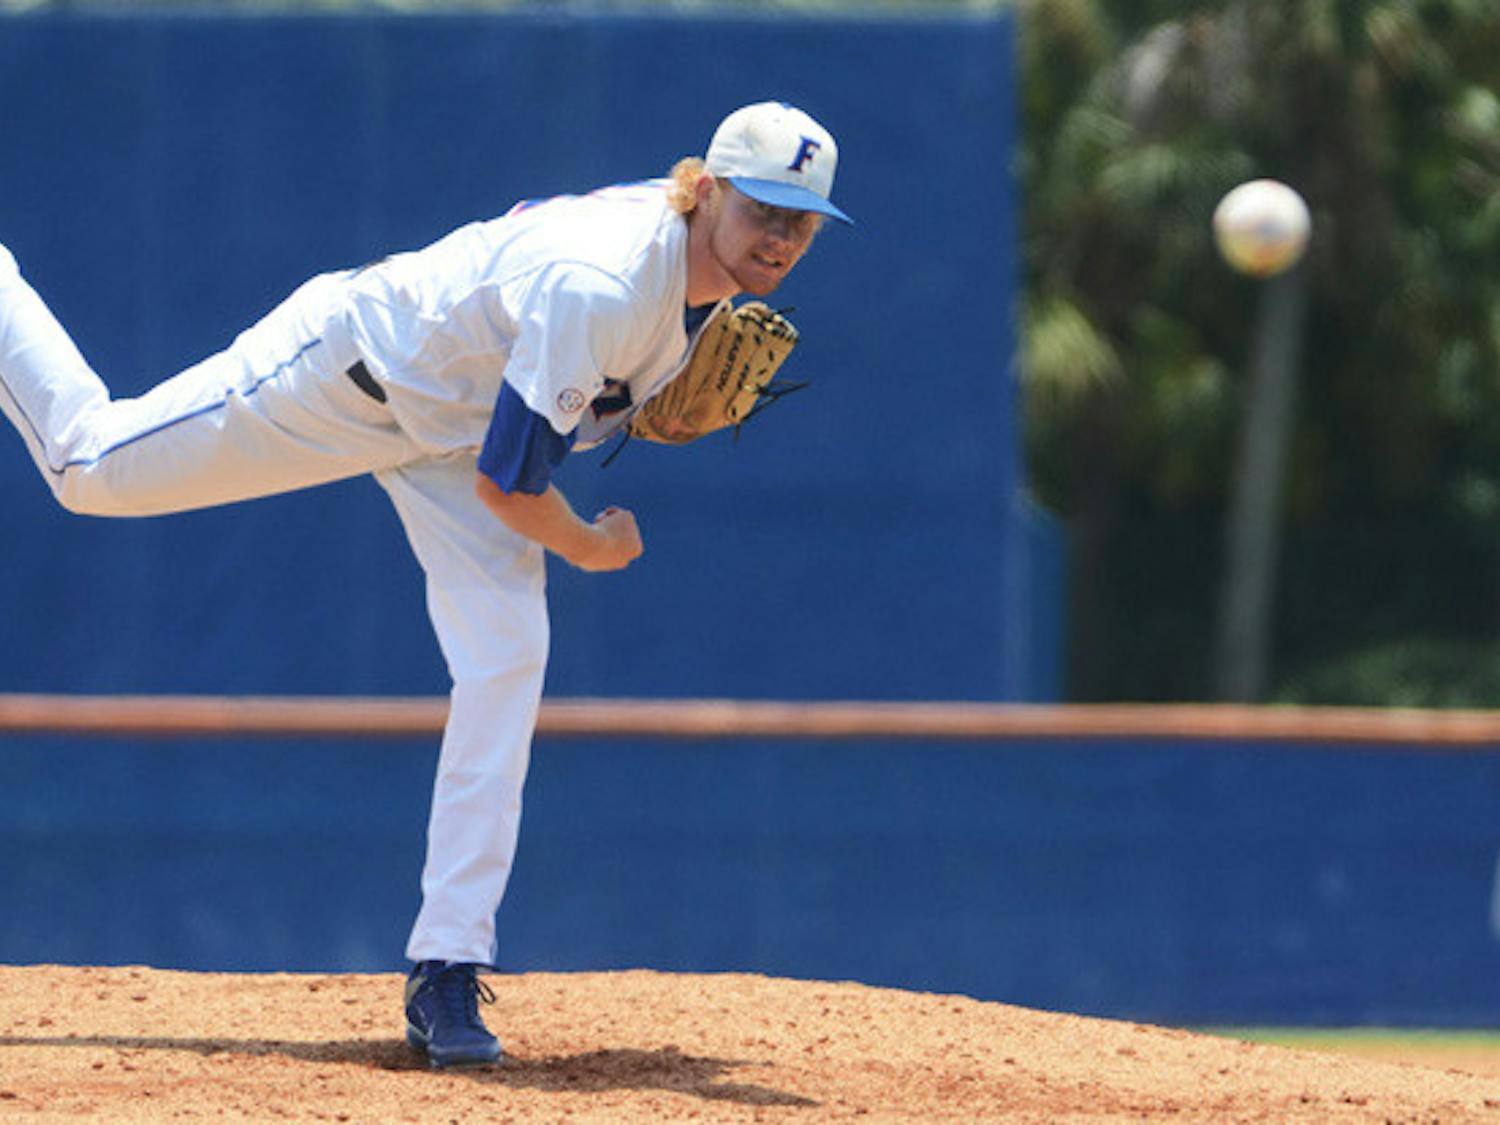 Florida right-handed pitcher Hudson Randall, who will start tonight's game against Cal State Fullerton, said he will be taking an aggressive approach against the small-ball prone Titans.